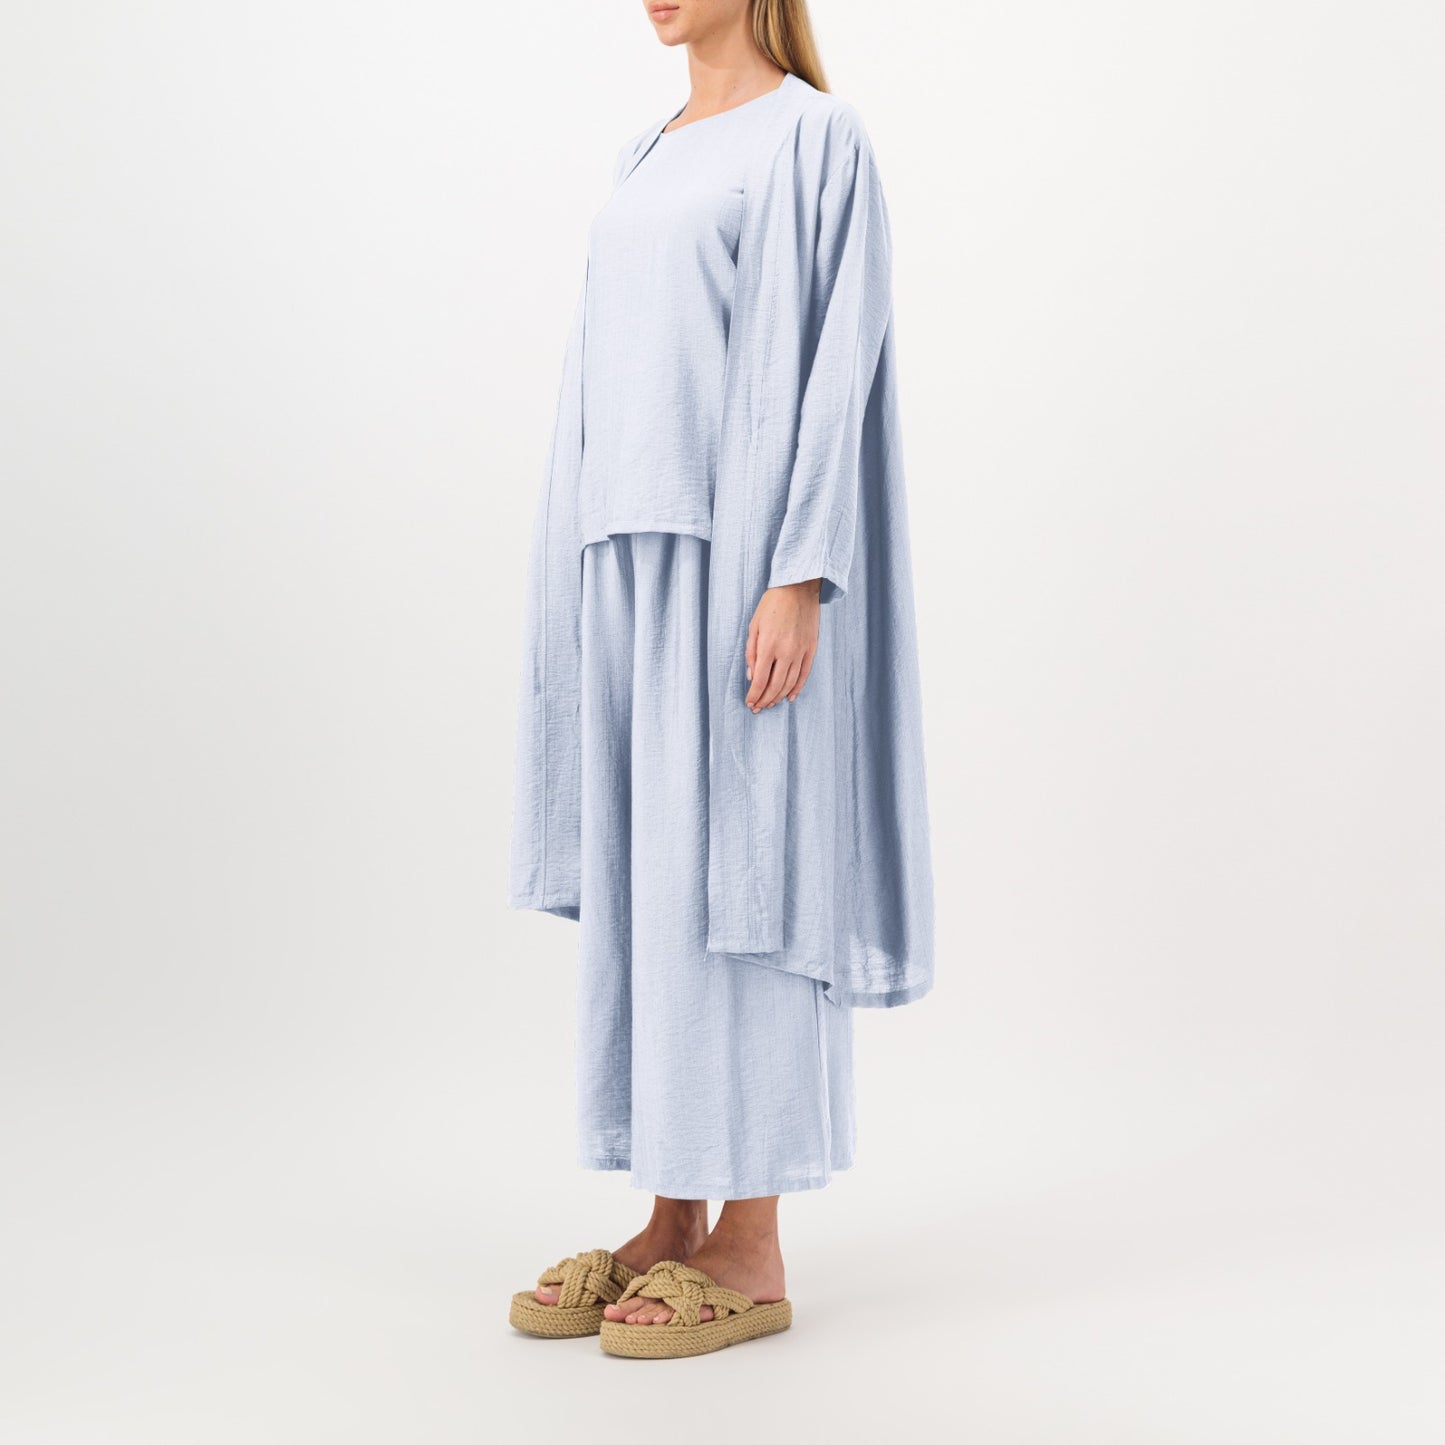 Powder Blue | All Day Closet Set of 3 - Comfortable style in attractive colors -arabian outfit - casual setcasual set - all day outfits - closet fashion store